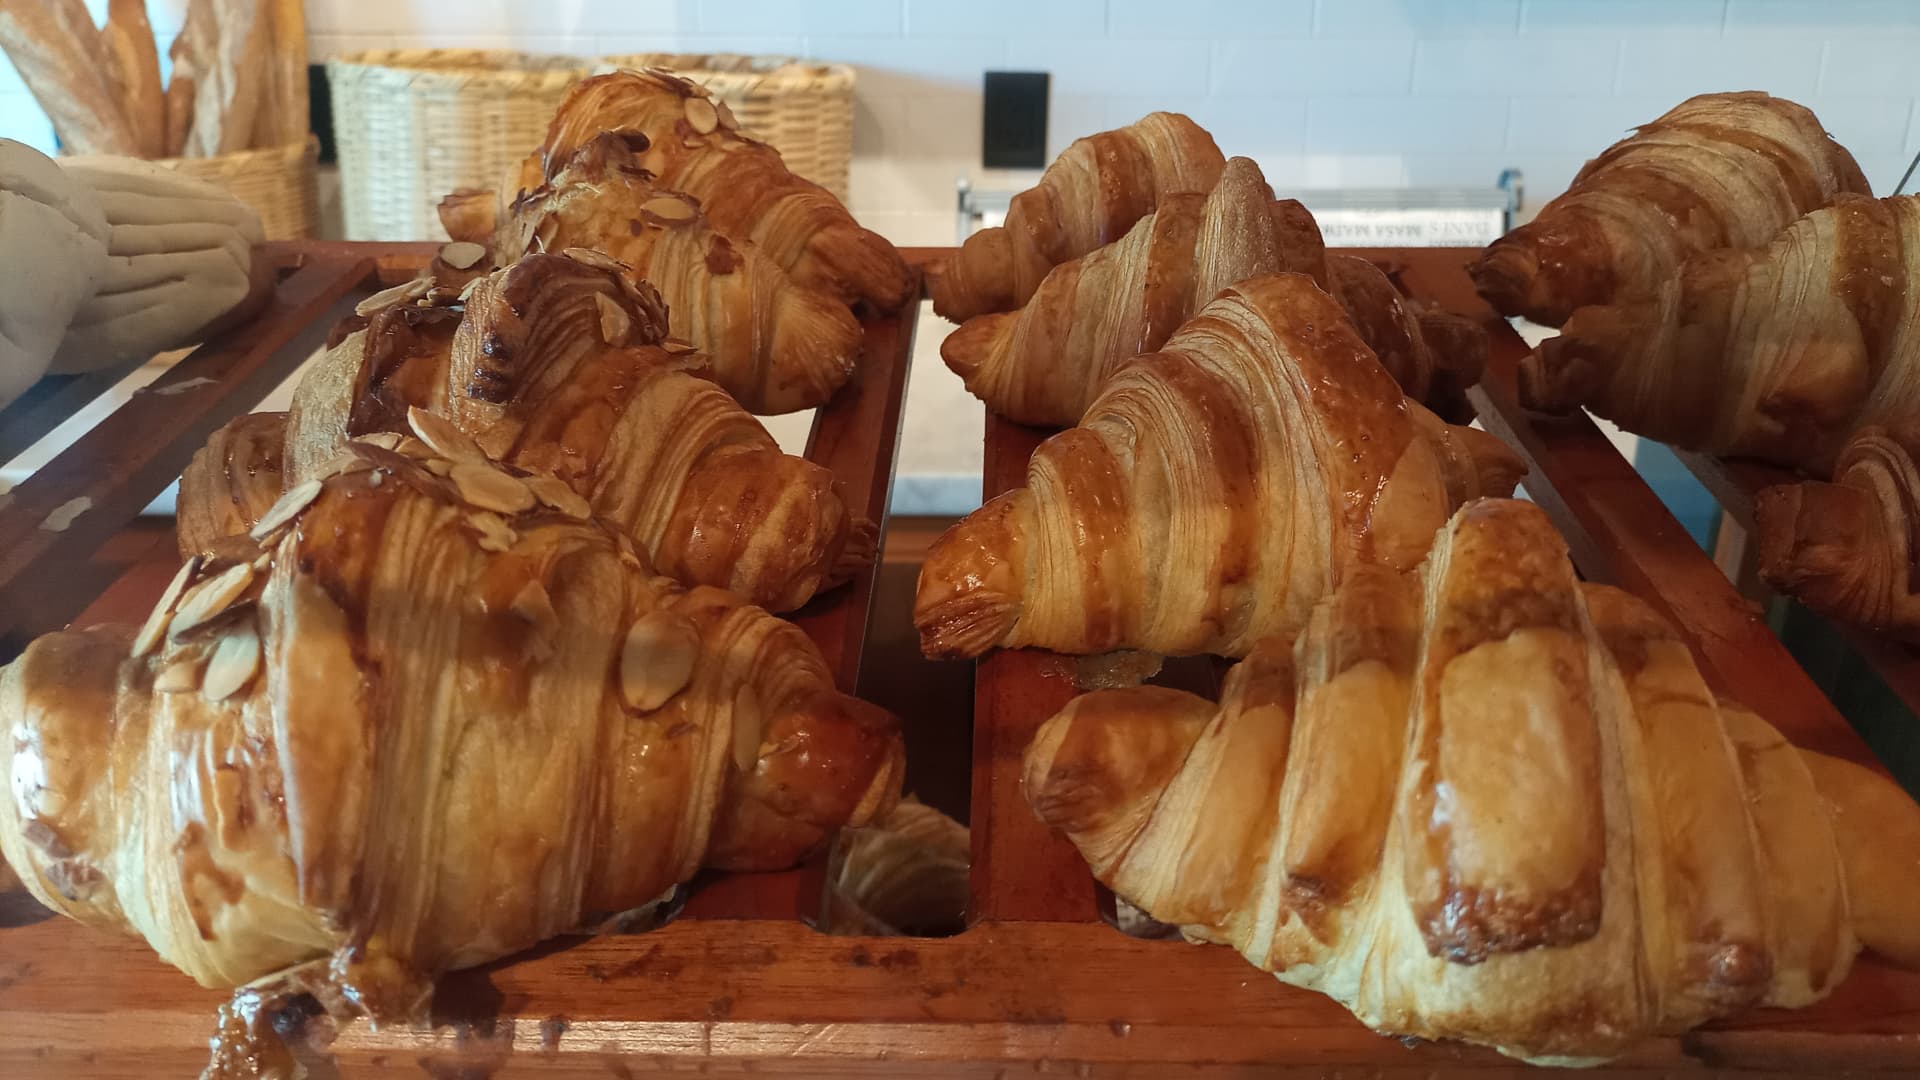 At my local bakery, I can get four of these buttery croissants for $5.